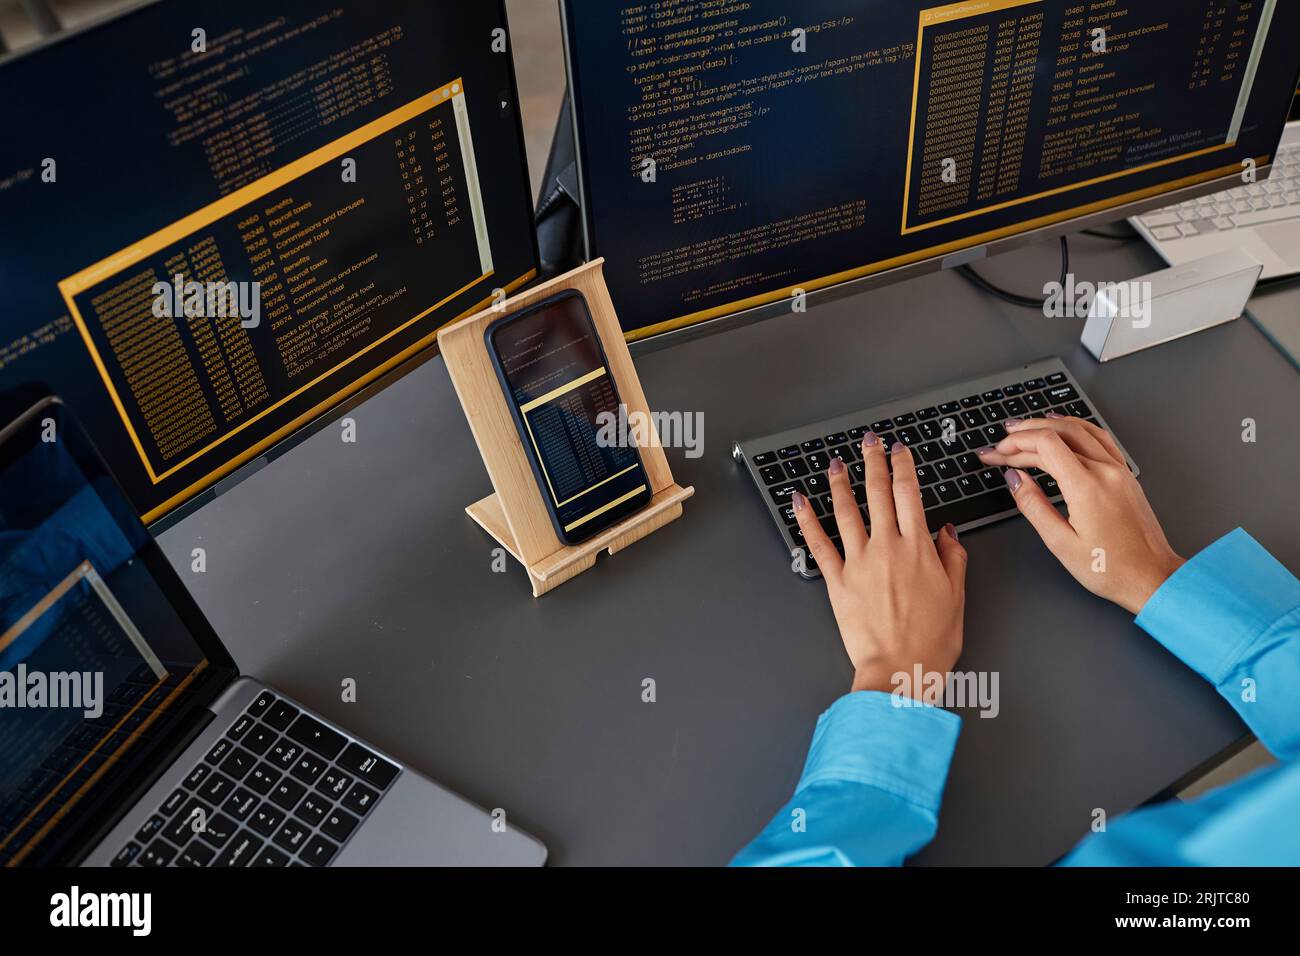 Hands of computer programmer typing on keyboard at desk Stock Photo